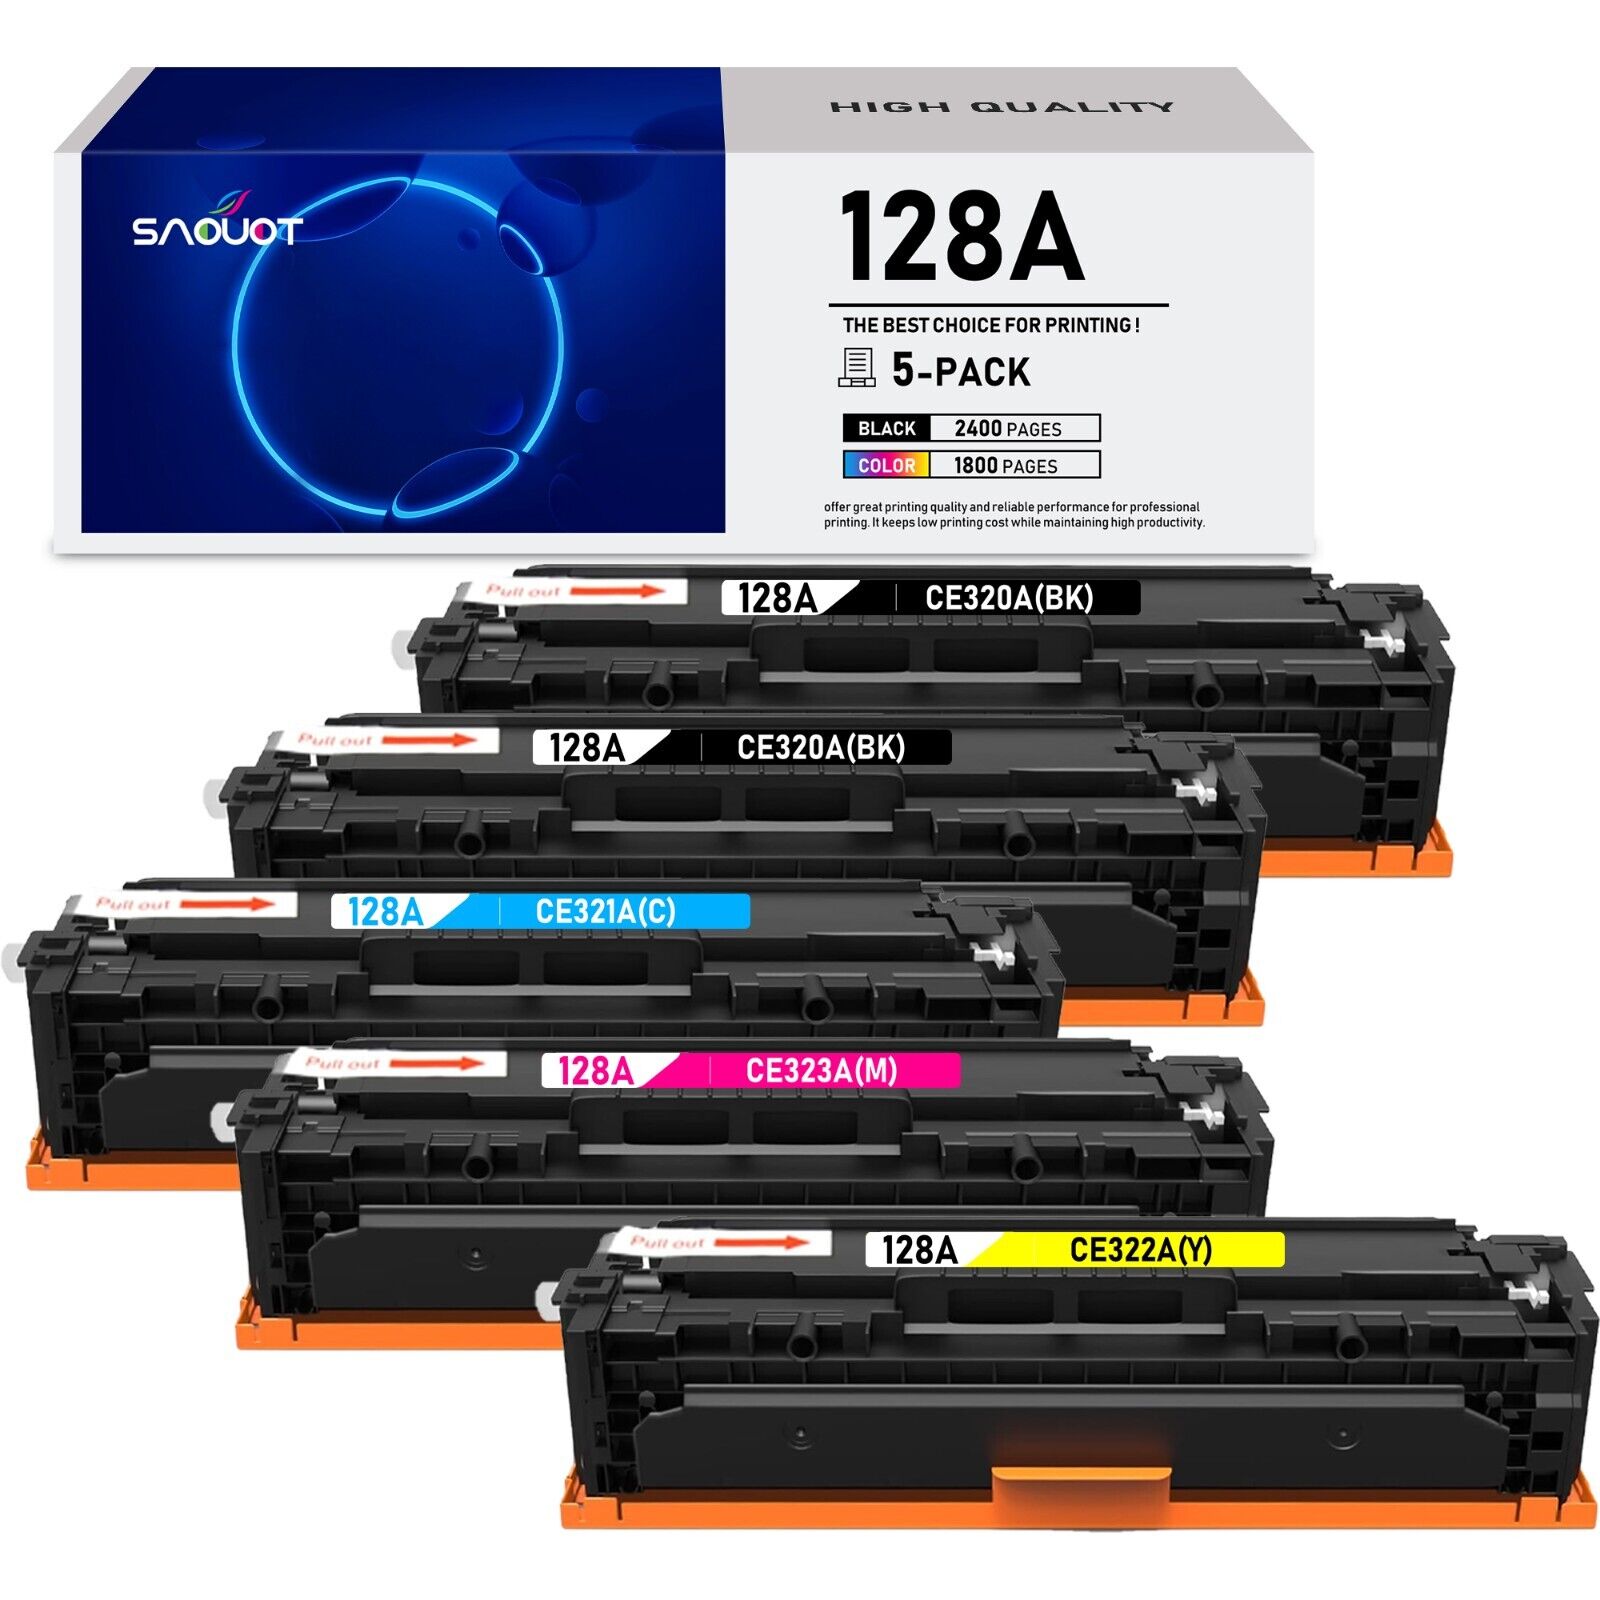 128A Toner Cartridge CE320A Replacement for HP Pro CM1415fn CP1525n CM1415fnw